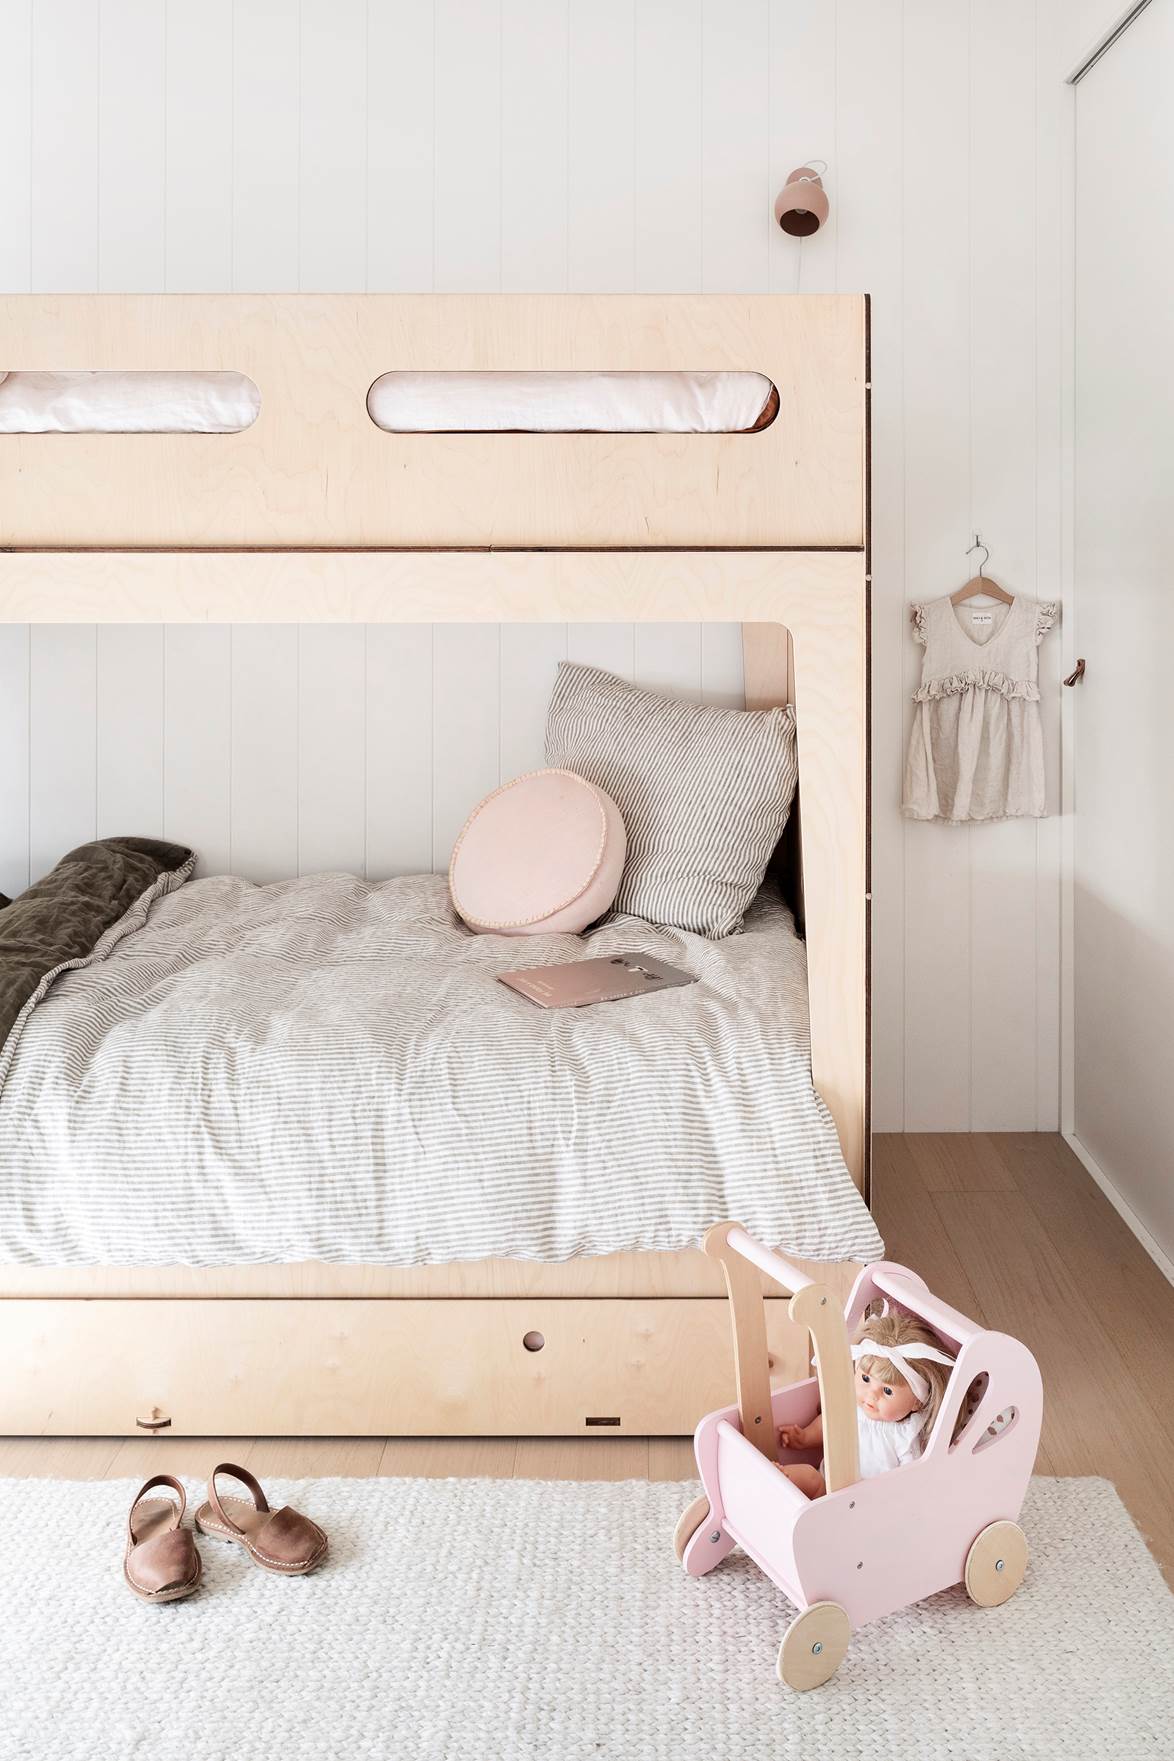 Inspired by the simplicity of the Scandinavian architecture and minimalist beach houses in New Zealand, this contemporary home's interiors are unassuming. "The palette is based on pale timbers, soft peachy tones, and warm whites, referencing the colors of the coastline," says owner Rebecca—Castello—bunk beds from Playroom tie in with the overall Scandi aesthetic.